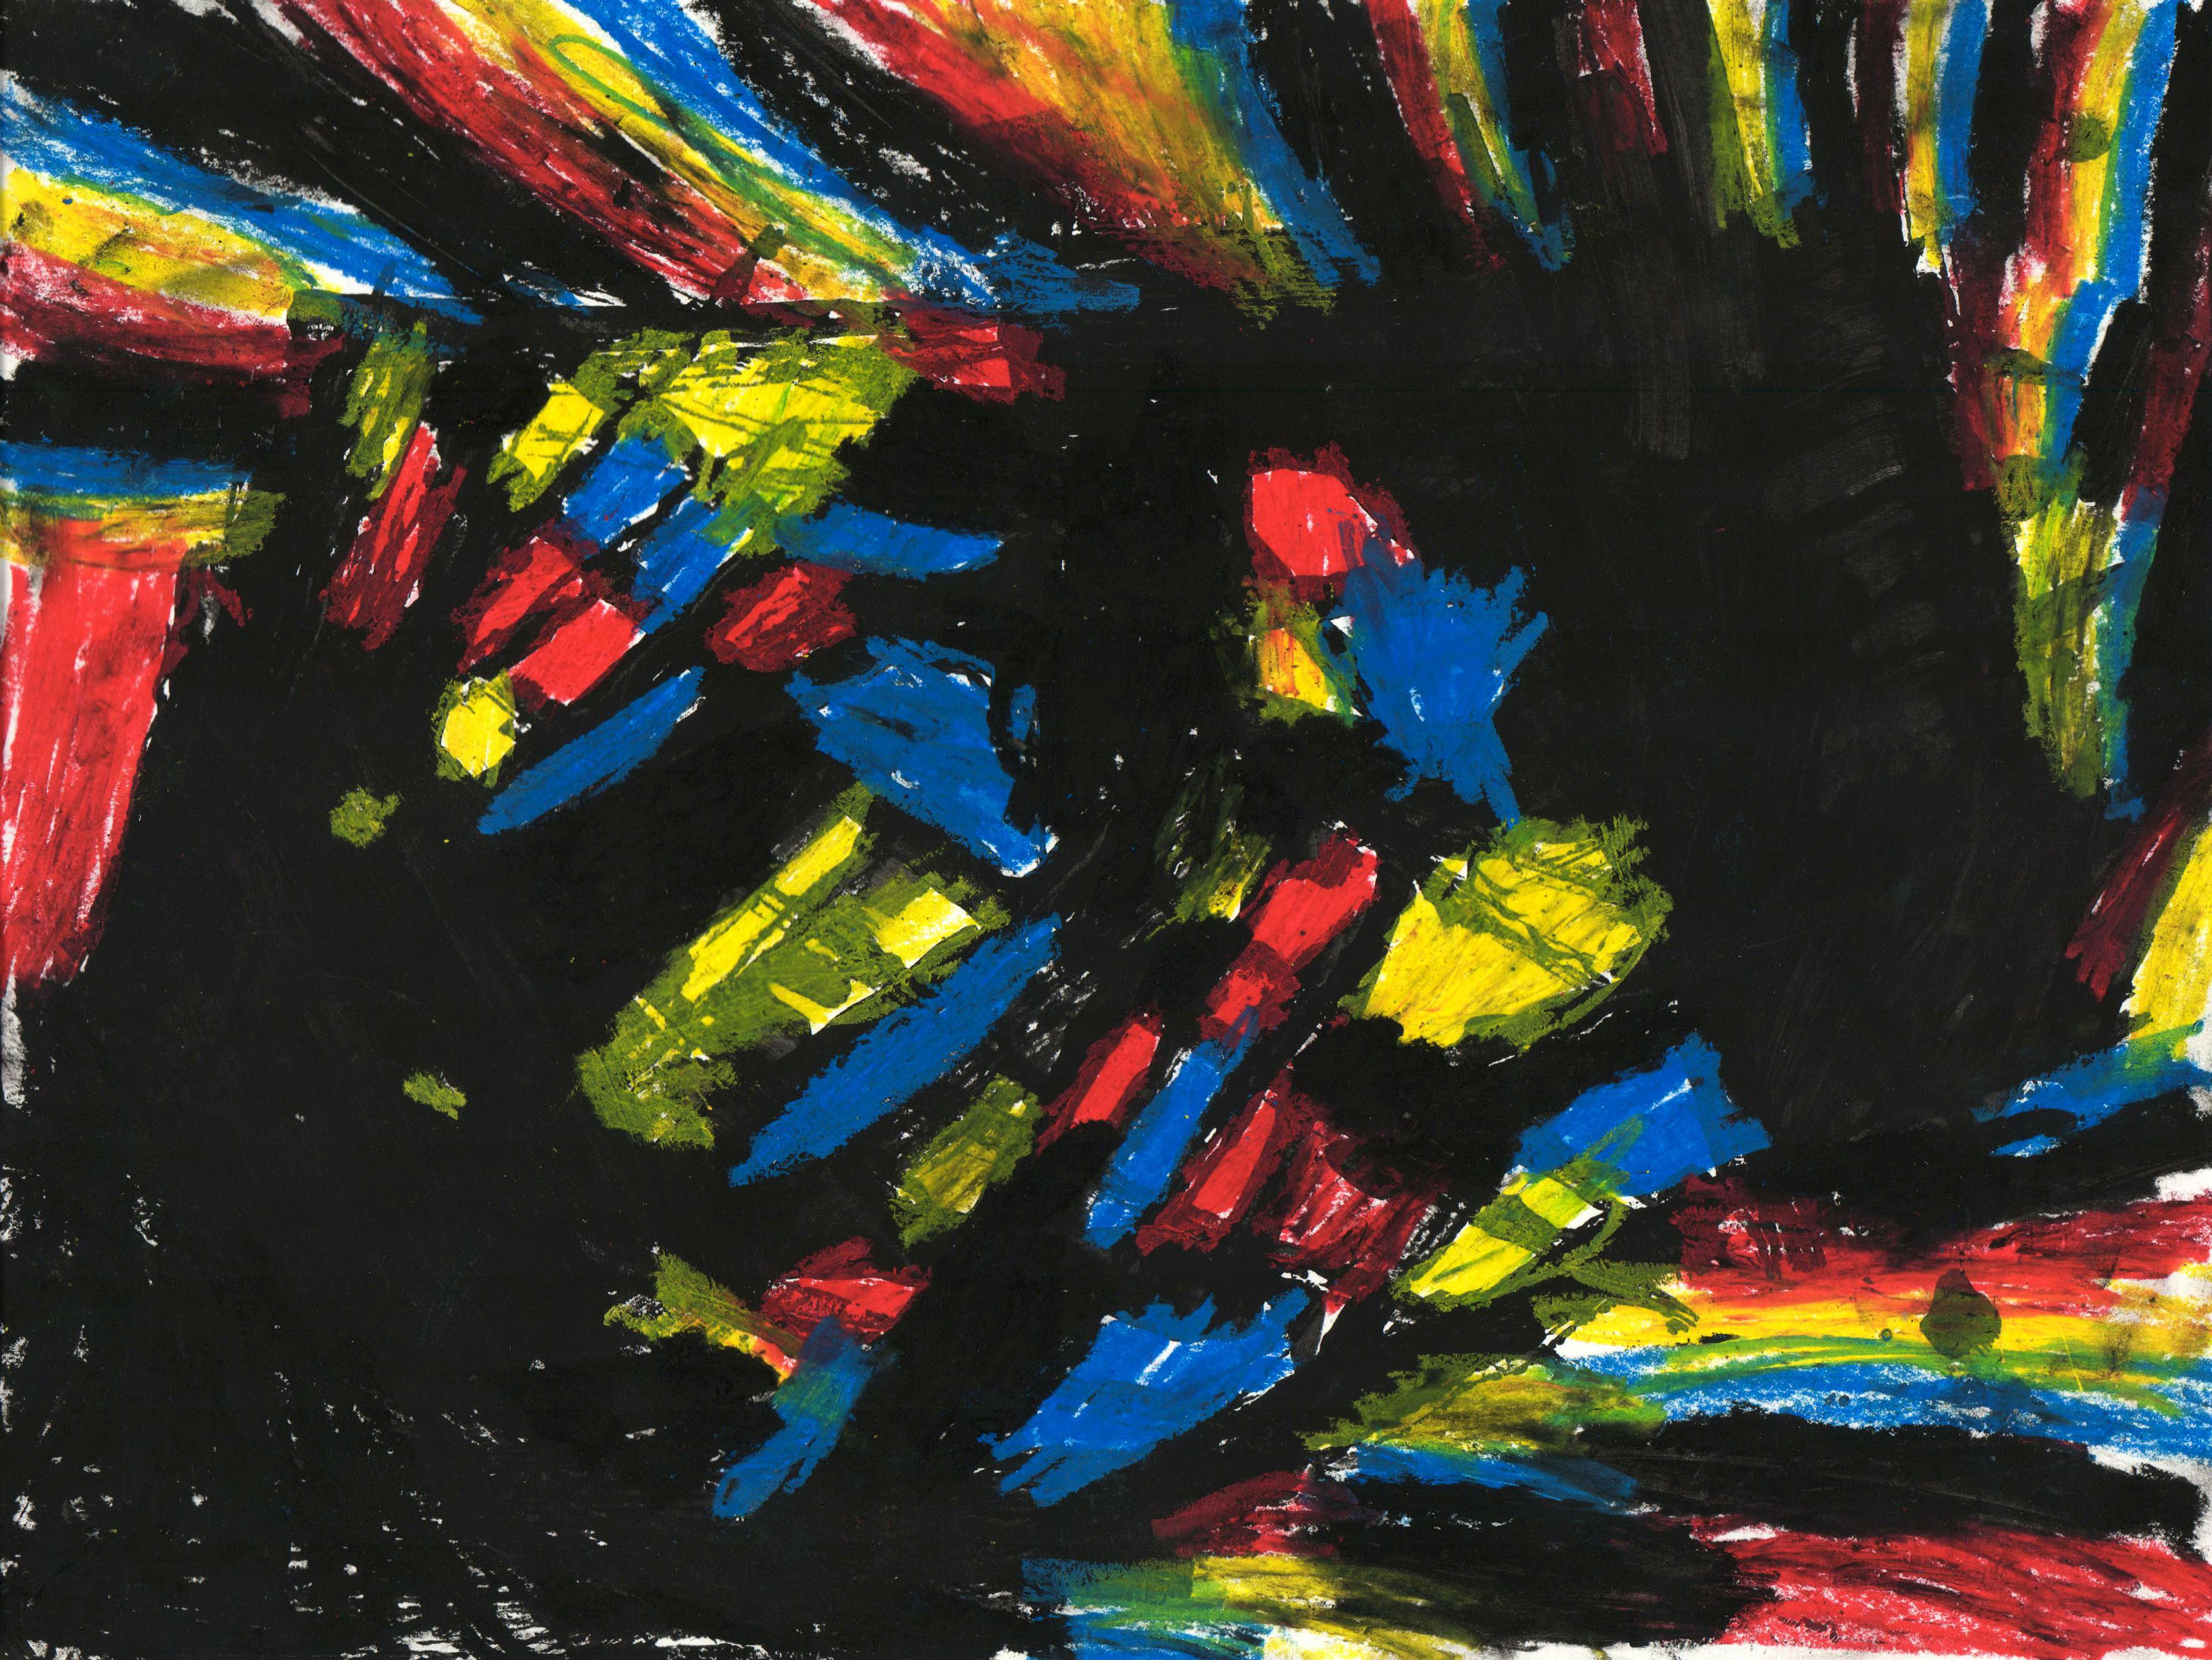 Abstract illustration created with oil pastel and tempera showing heavy black regions of tempera interspersed with crisscrossed blue, red, and yellow strokes of bright oil pastels.